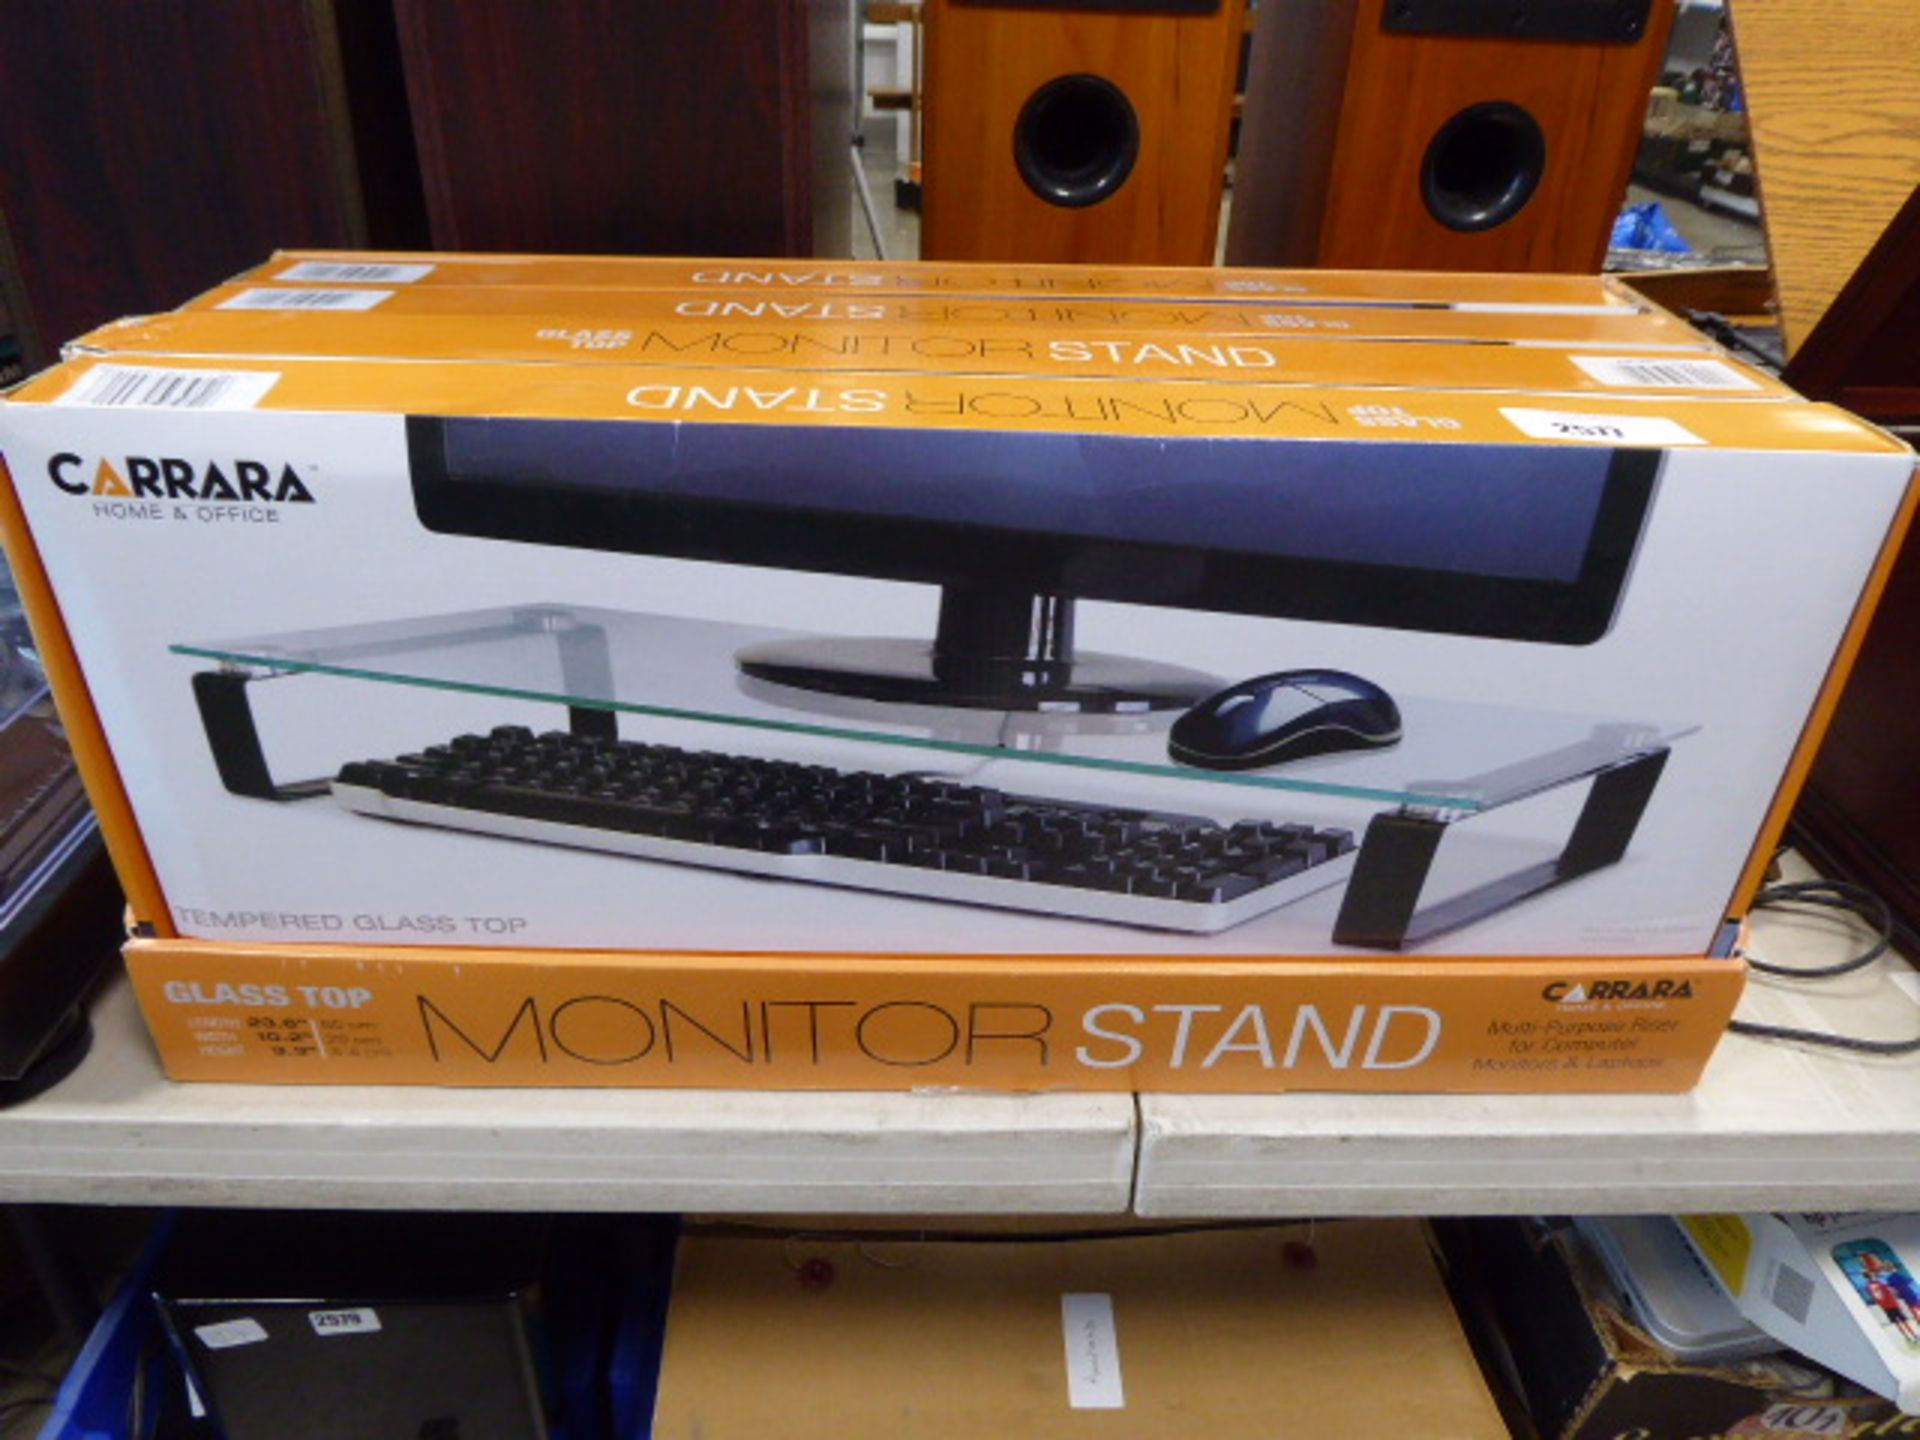 4 Carara office and home monitor stands in boxes